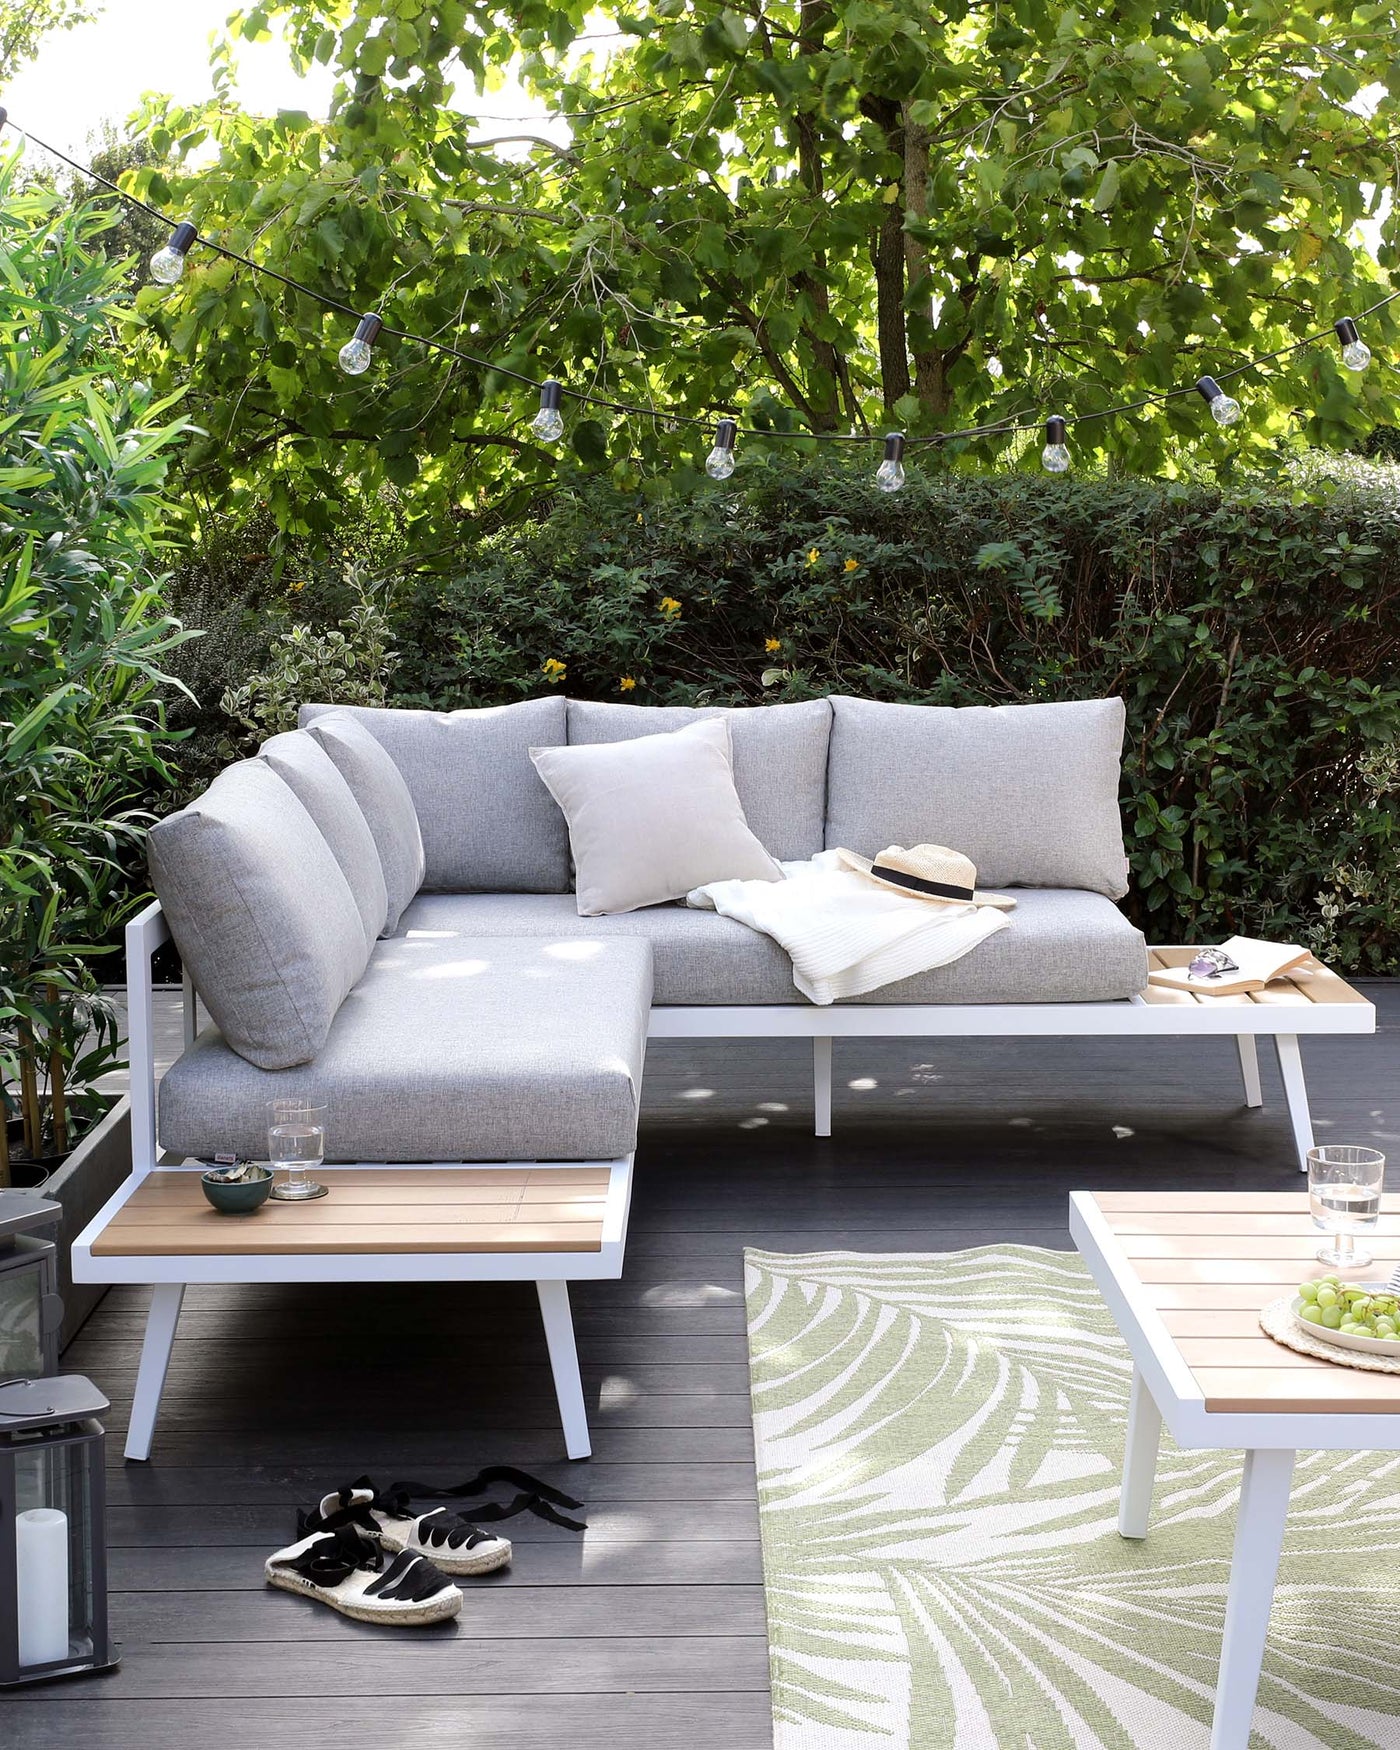 Outdoor contemporary furniture set consisting of a sleek white and grey sofa with comfortable grey cushions, accompanied by a white coffee table with a wooden tabletop. The set is arranged on a wooden deck with an accent of a patterned green outdoor rug, creating a cosy and inviting outdoor living space.